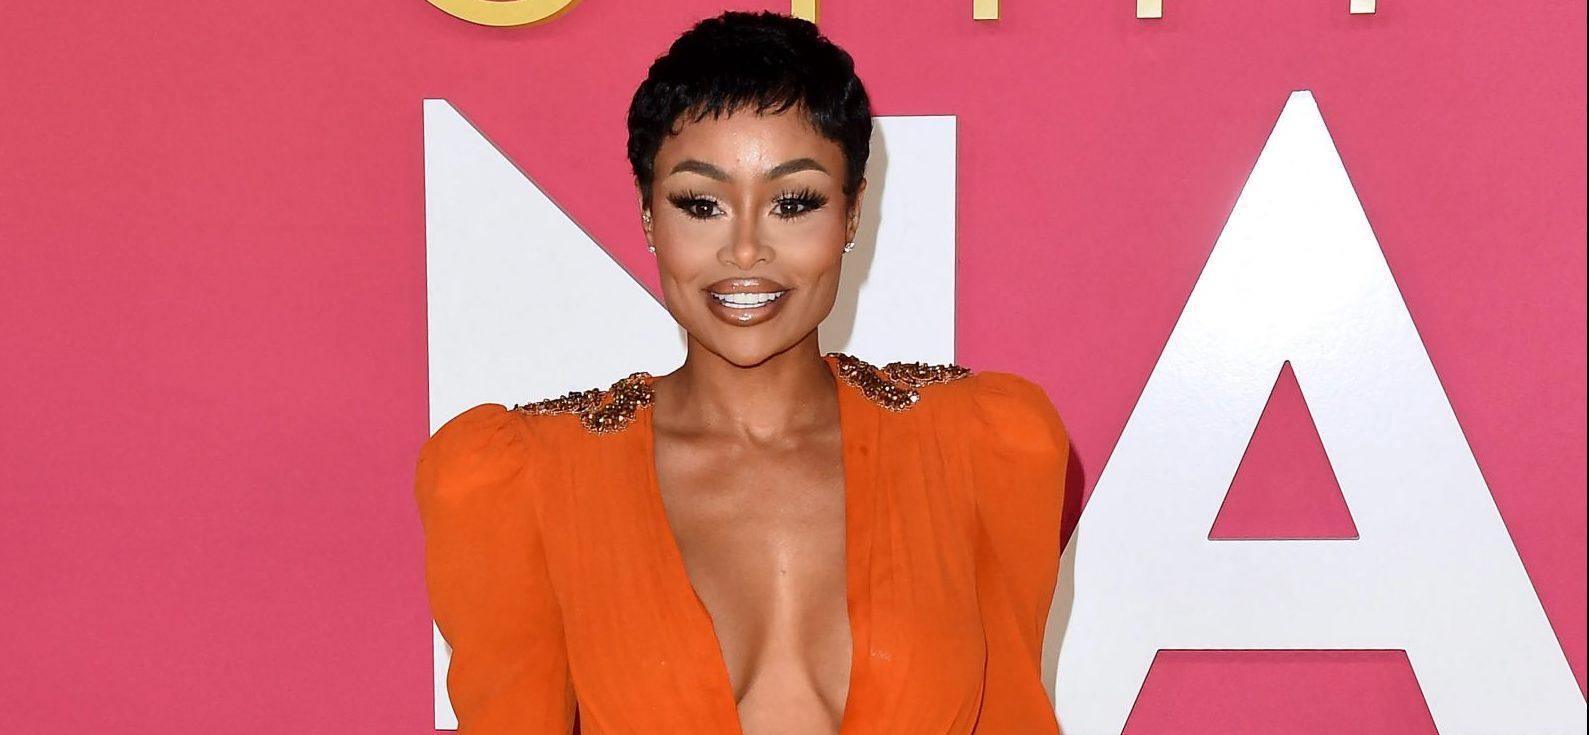 Blac Chyna Celebrates 10 Months Of Sobriety: ‘Clean Eating, Working Out’